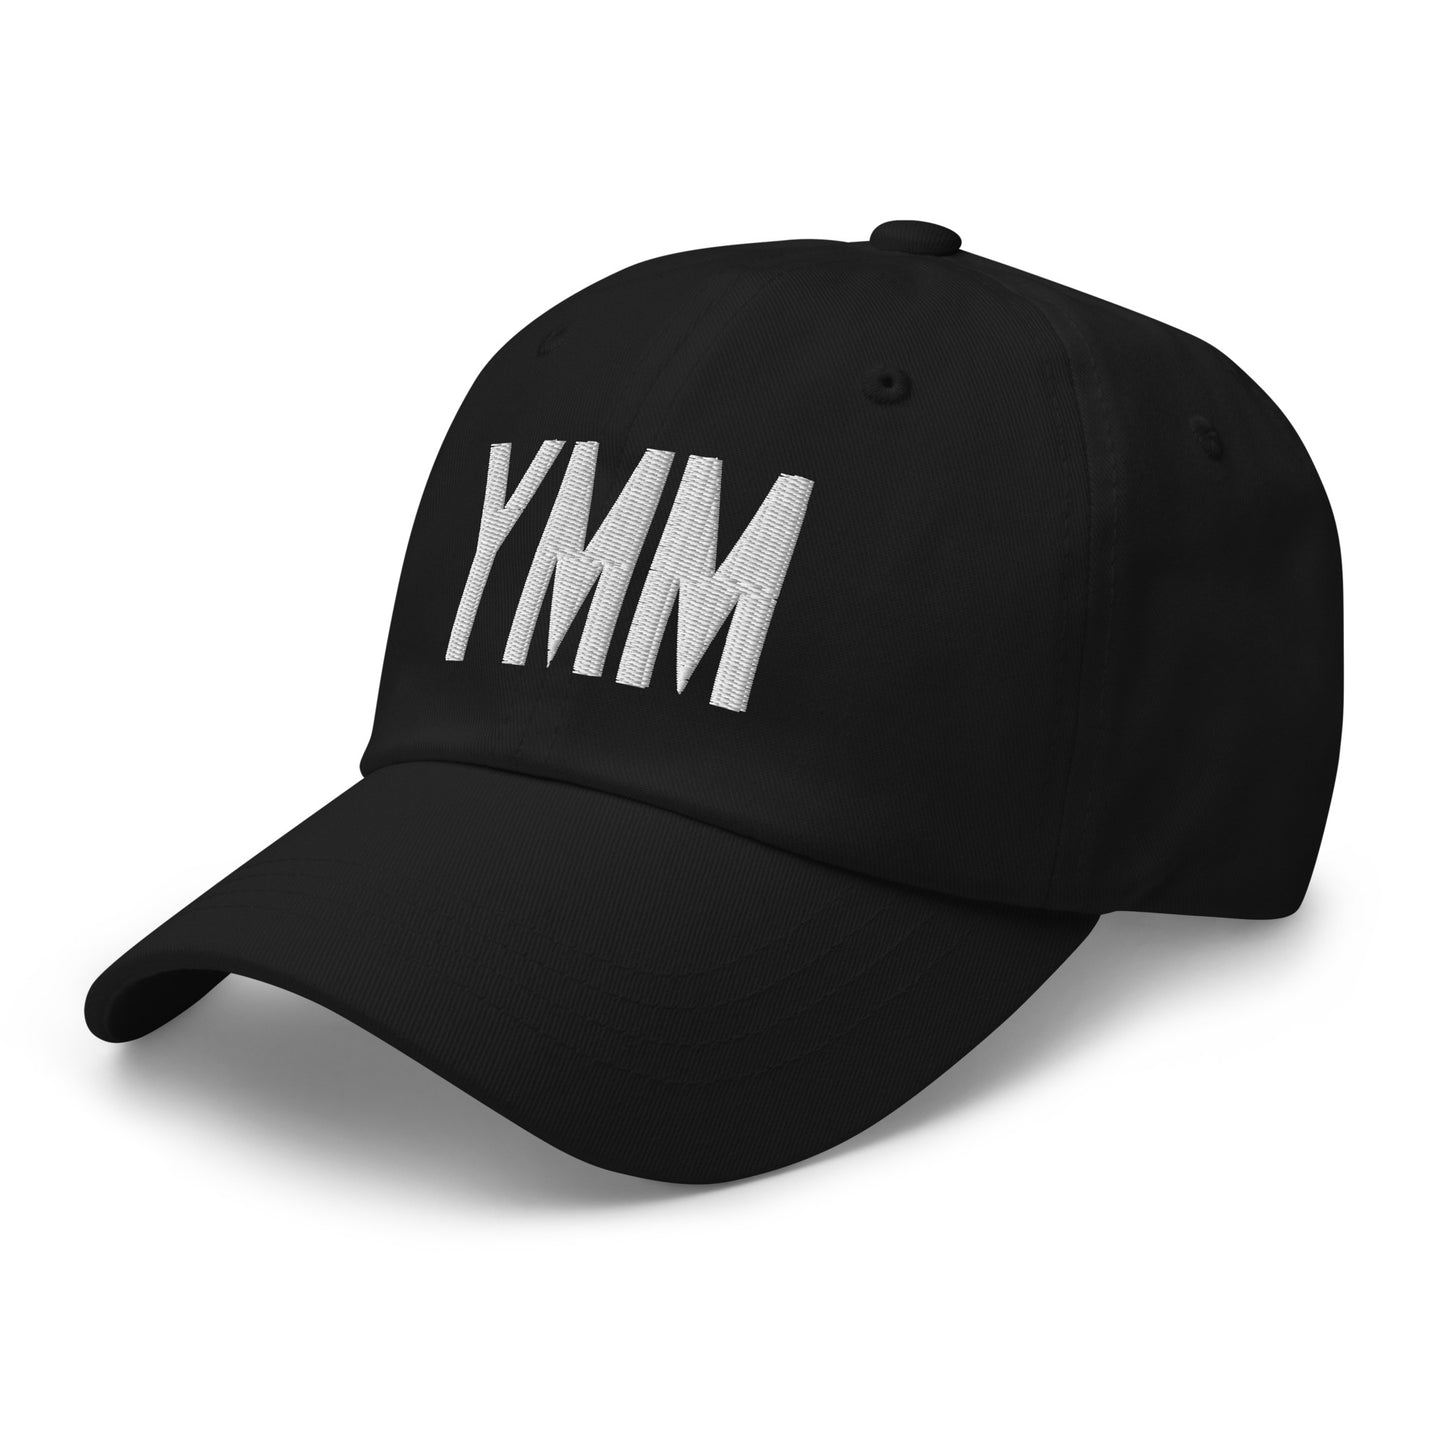 Airport Code Baseball Cap - White • YMM Fort McMurray • YHM Designs - Image 01